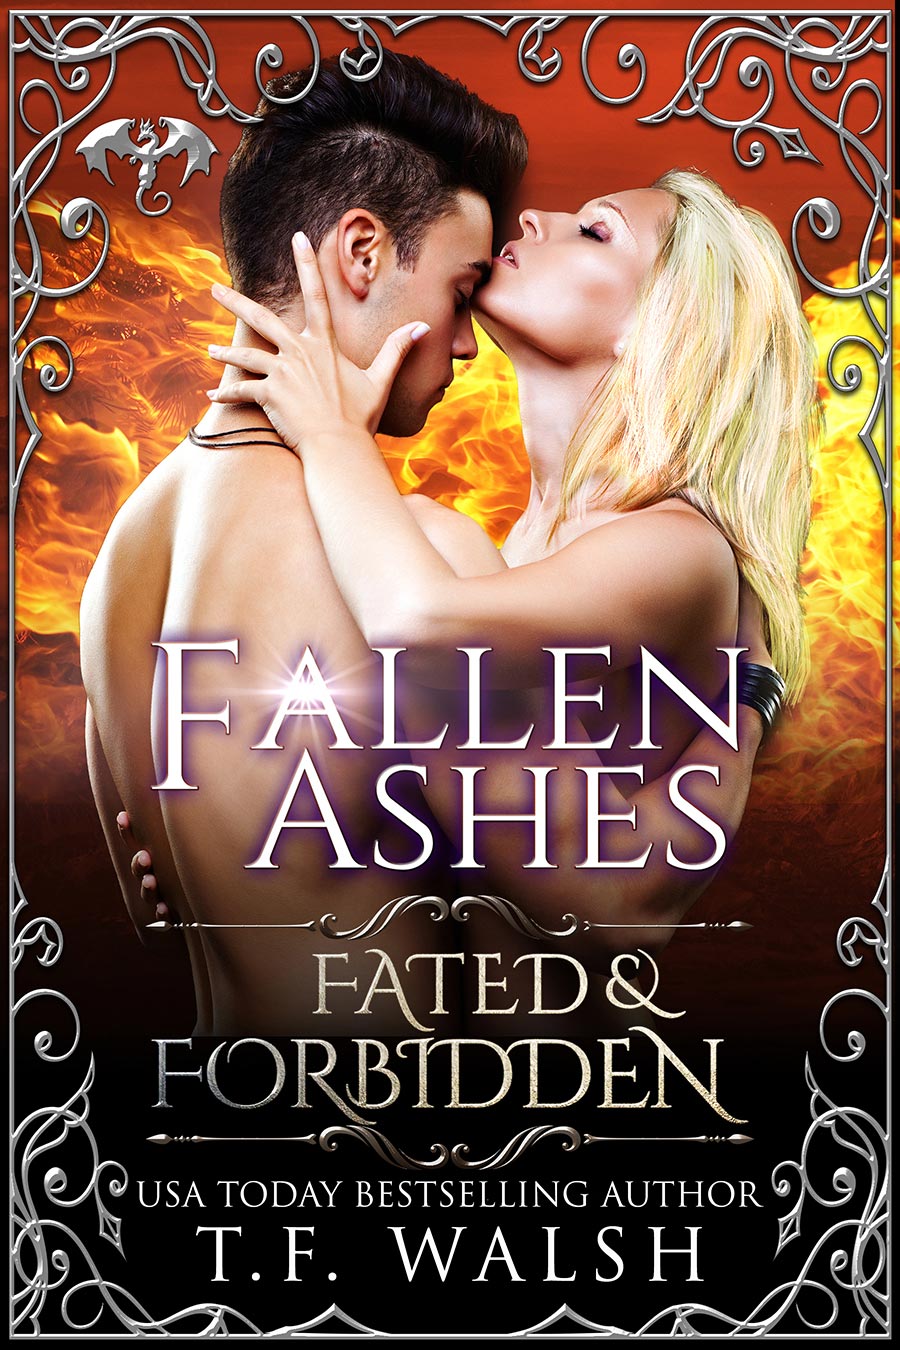 Fated-and-Forbidden---Fallen-Ashes---TF-Walsh---LETTERS.jpg